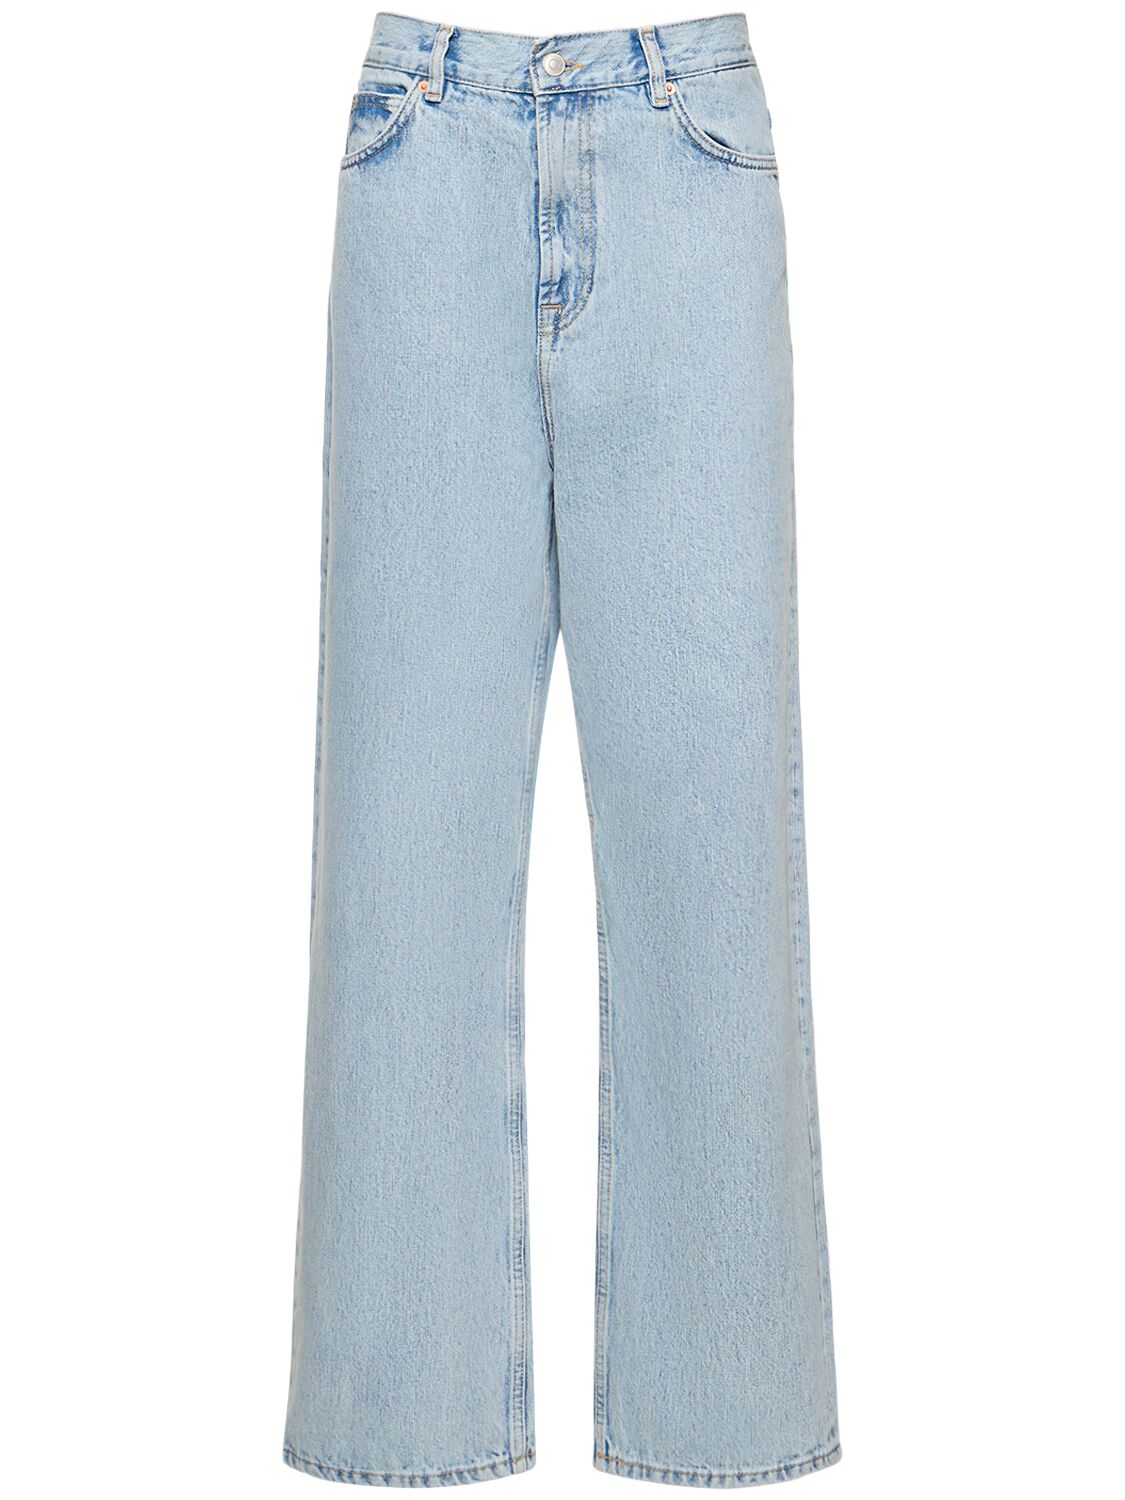 Wardrobe.nyc Cotton Denim Low Rise Jeans In Blue